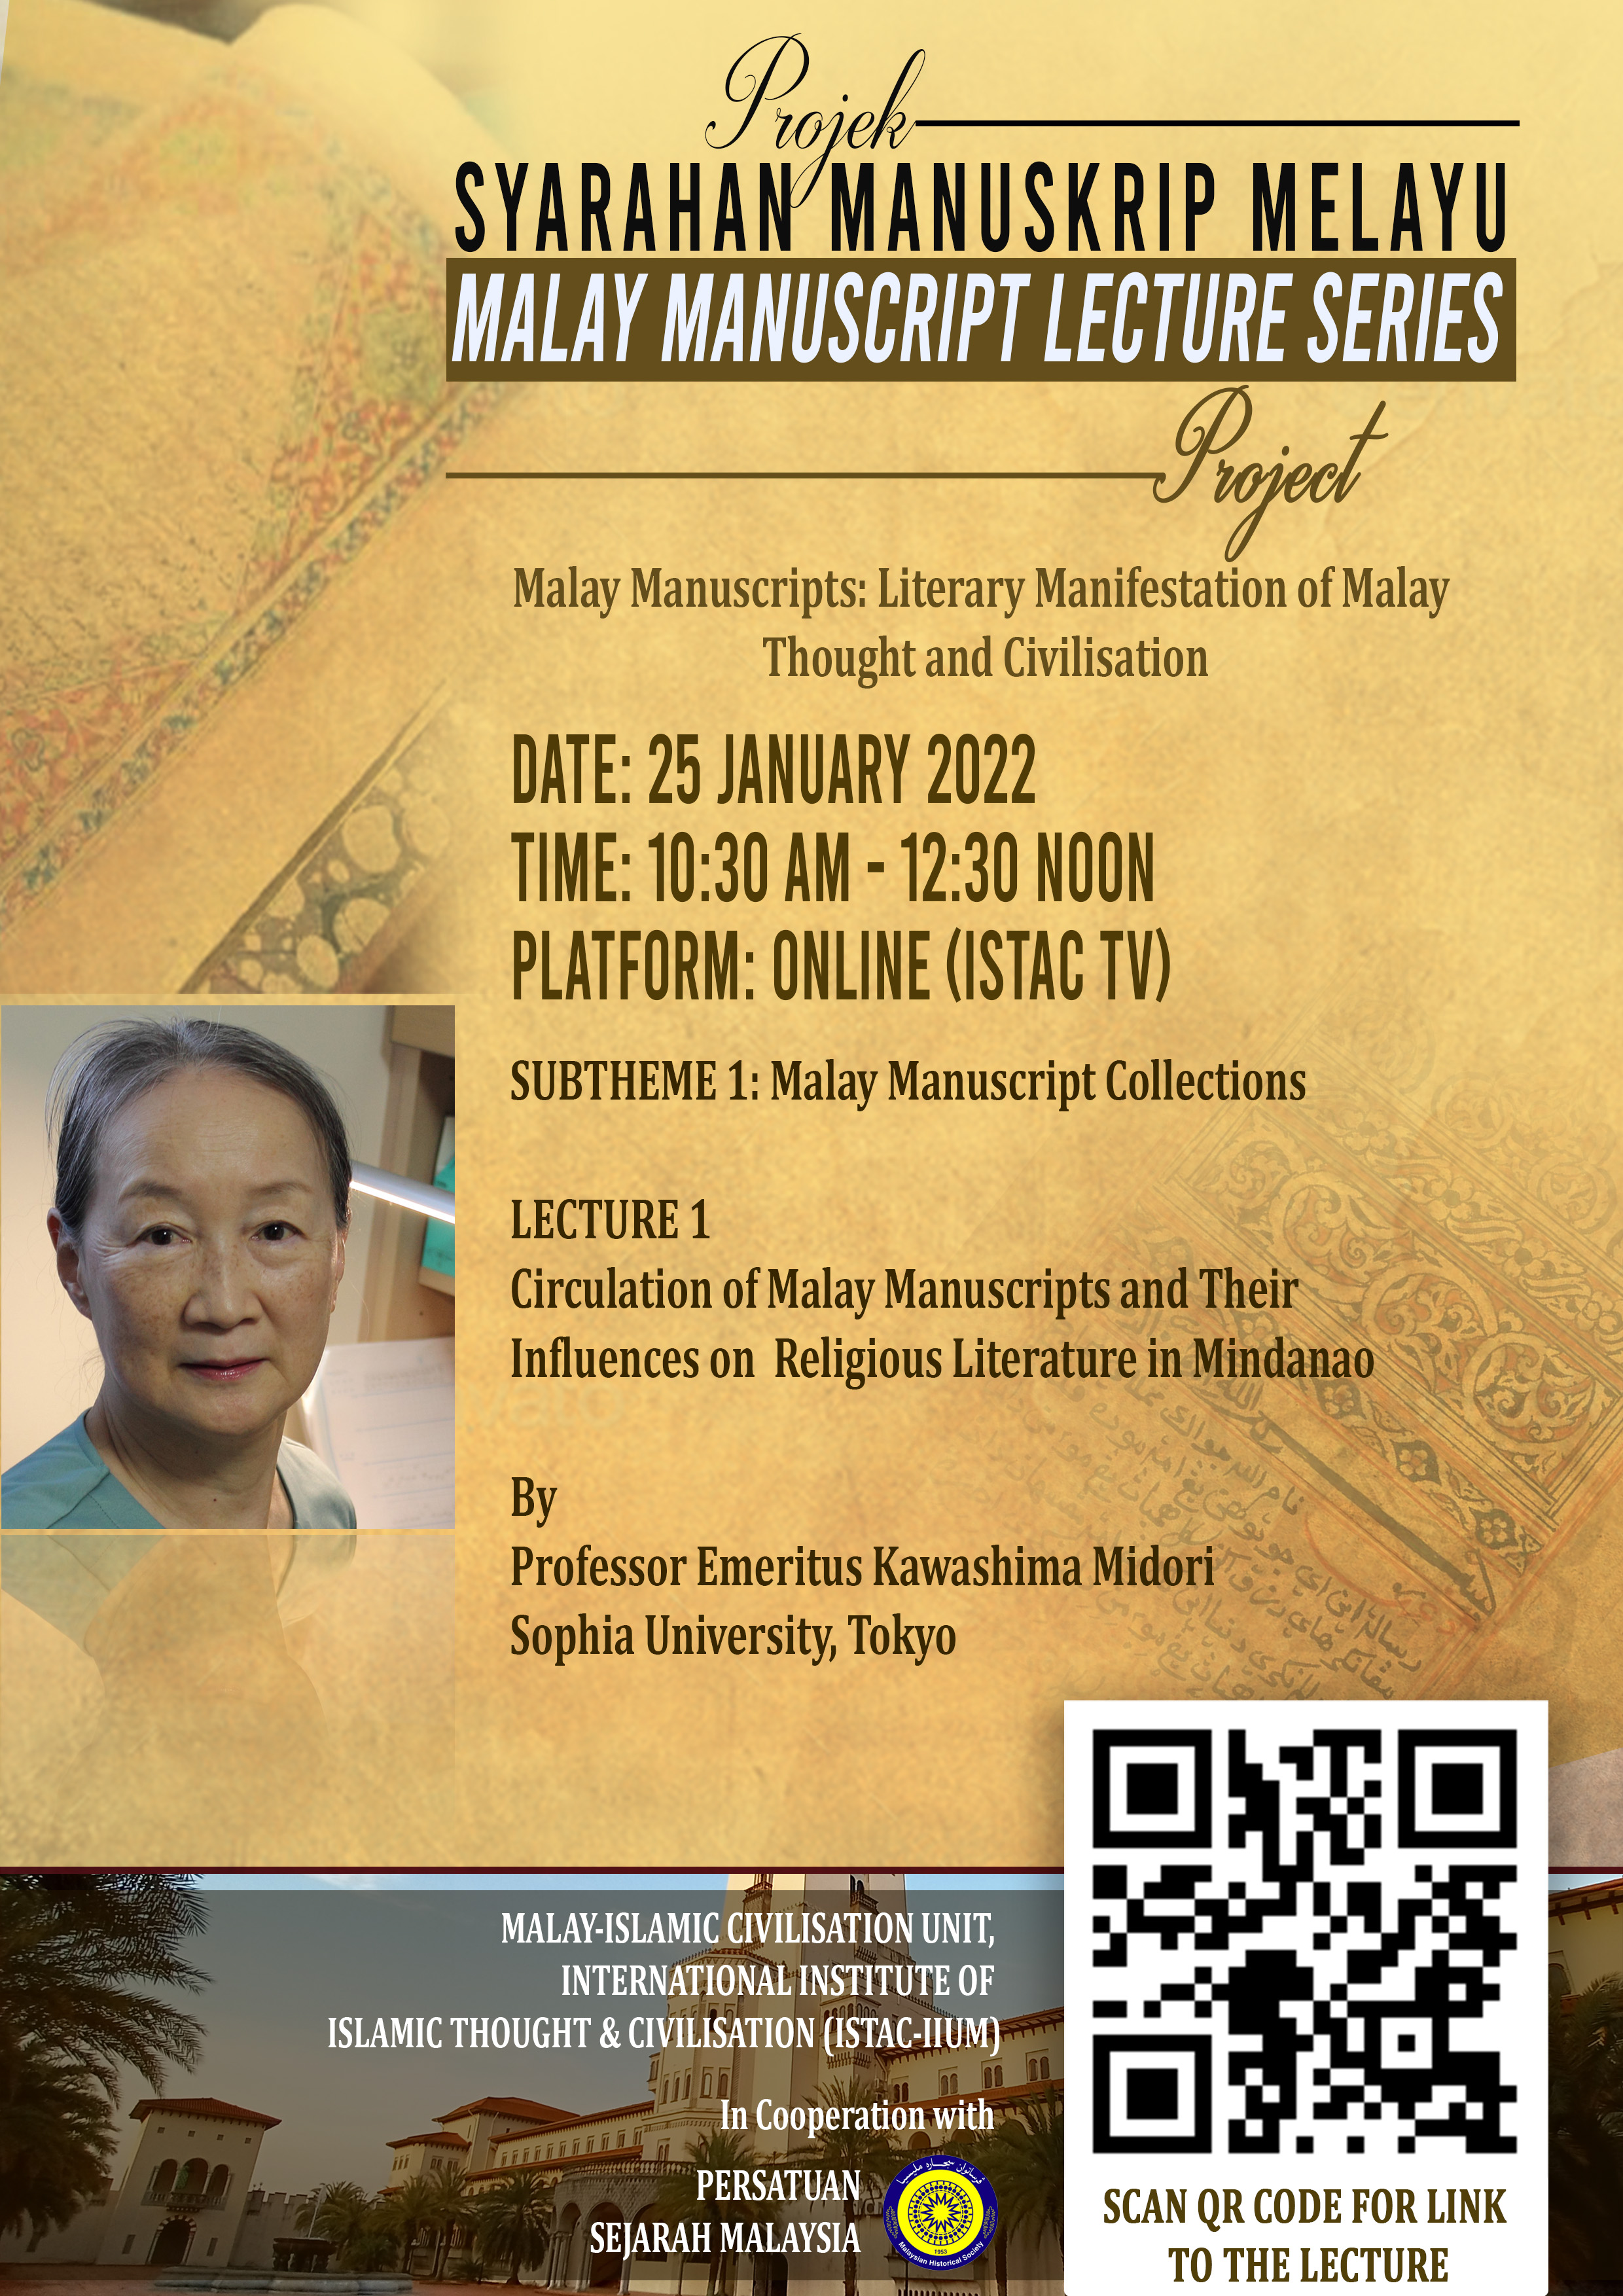 MALAY MANUSCRIPT LECTURE SERIES PROJECT_LECTURE 1